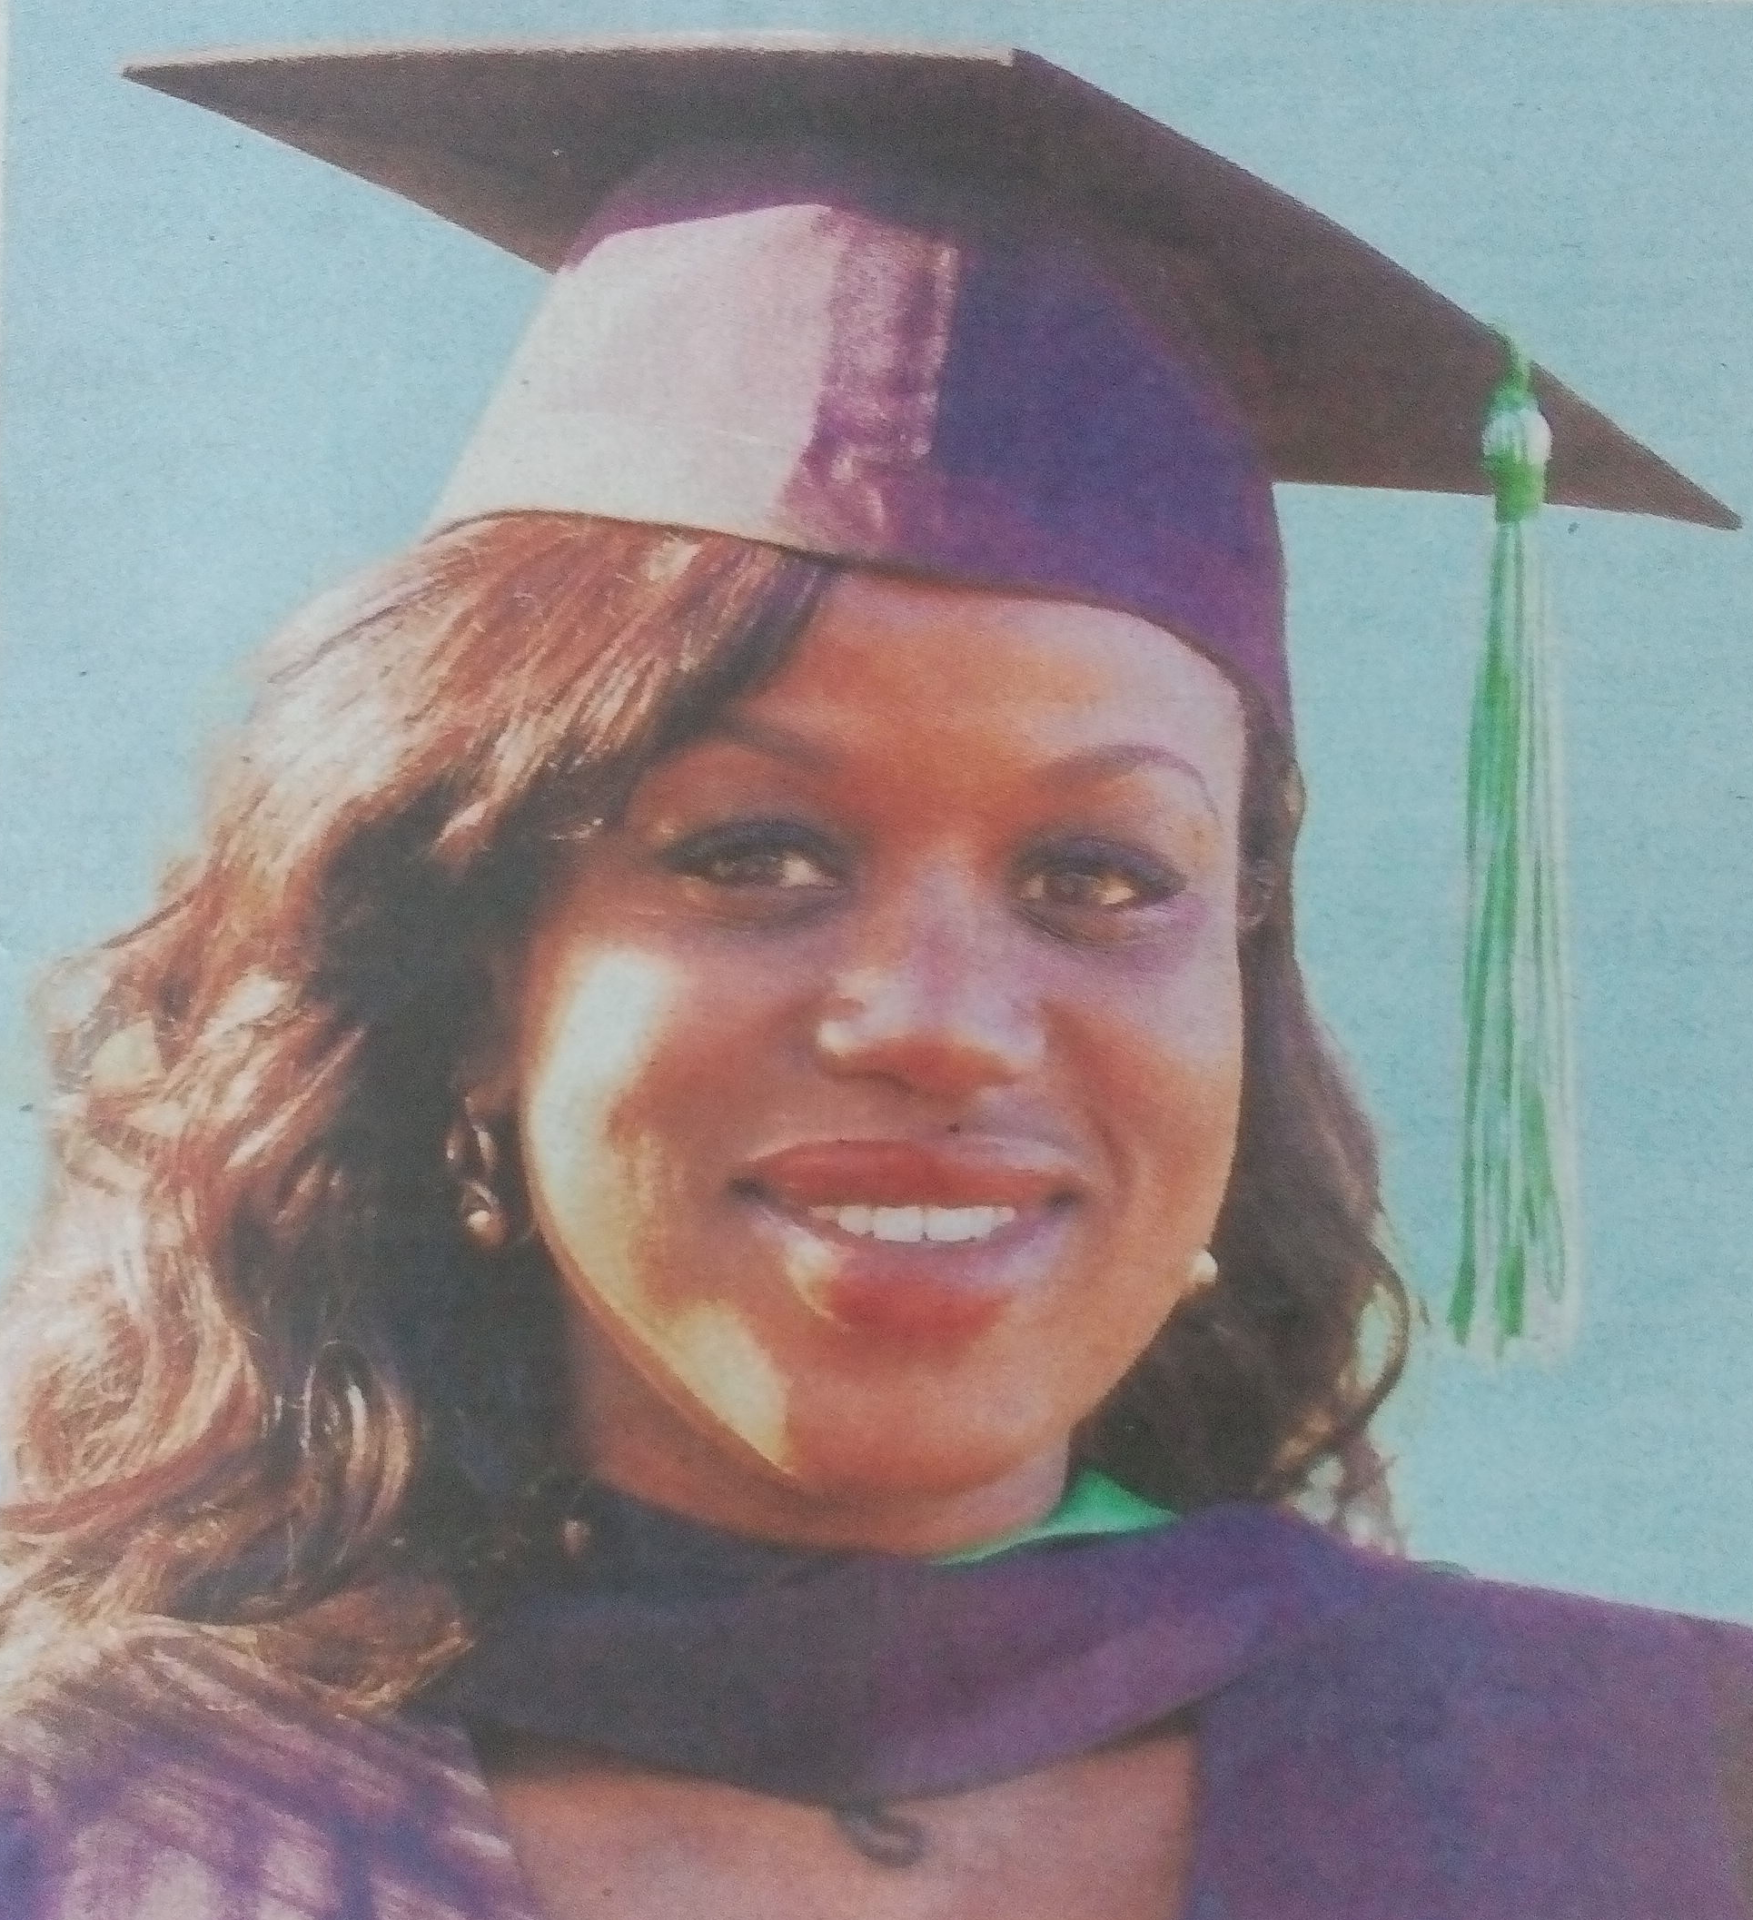 Obituary Image of Dr Phyllis Njeri Muigai BSc (Canada), M.D. (UK), Mmed (Psych), MBA